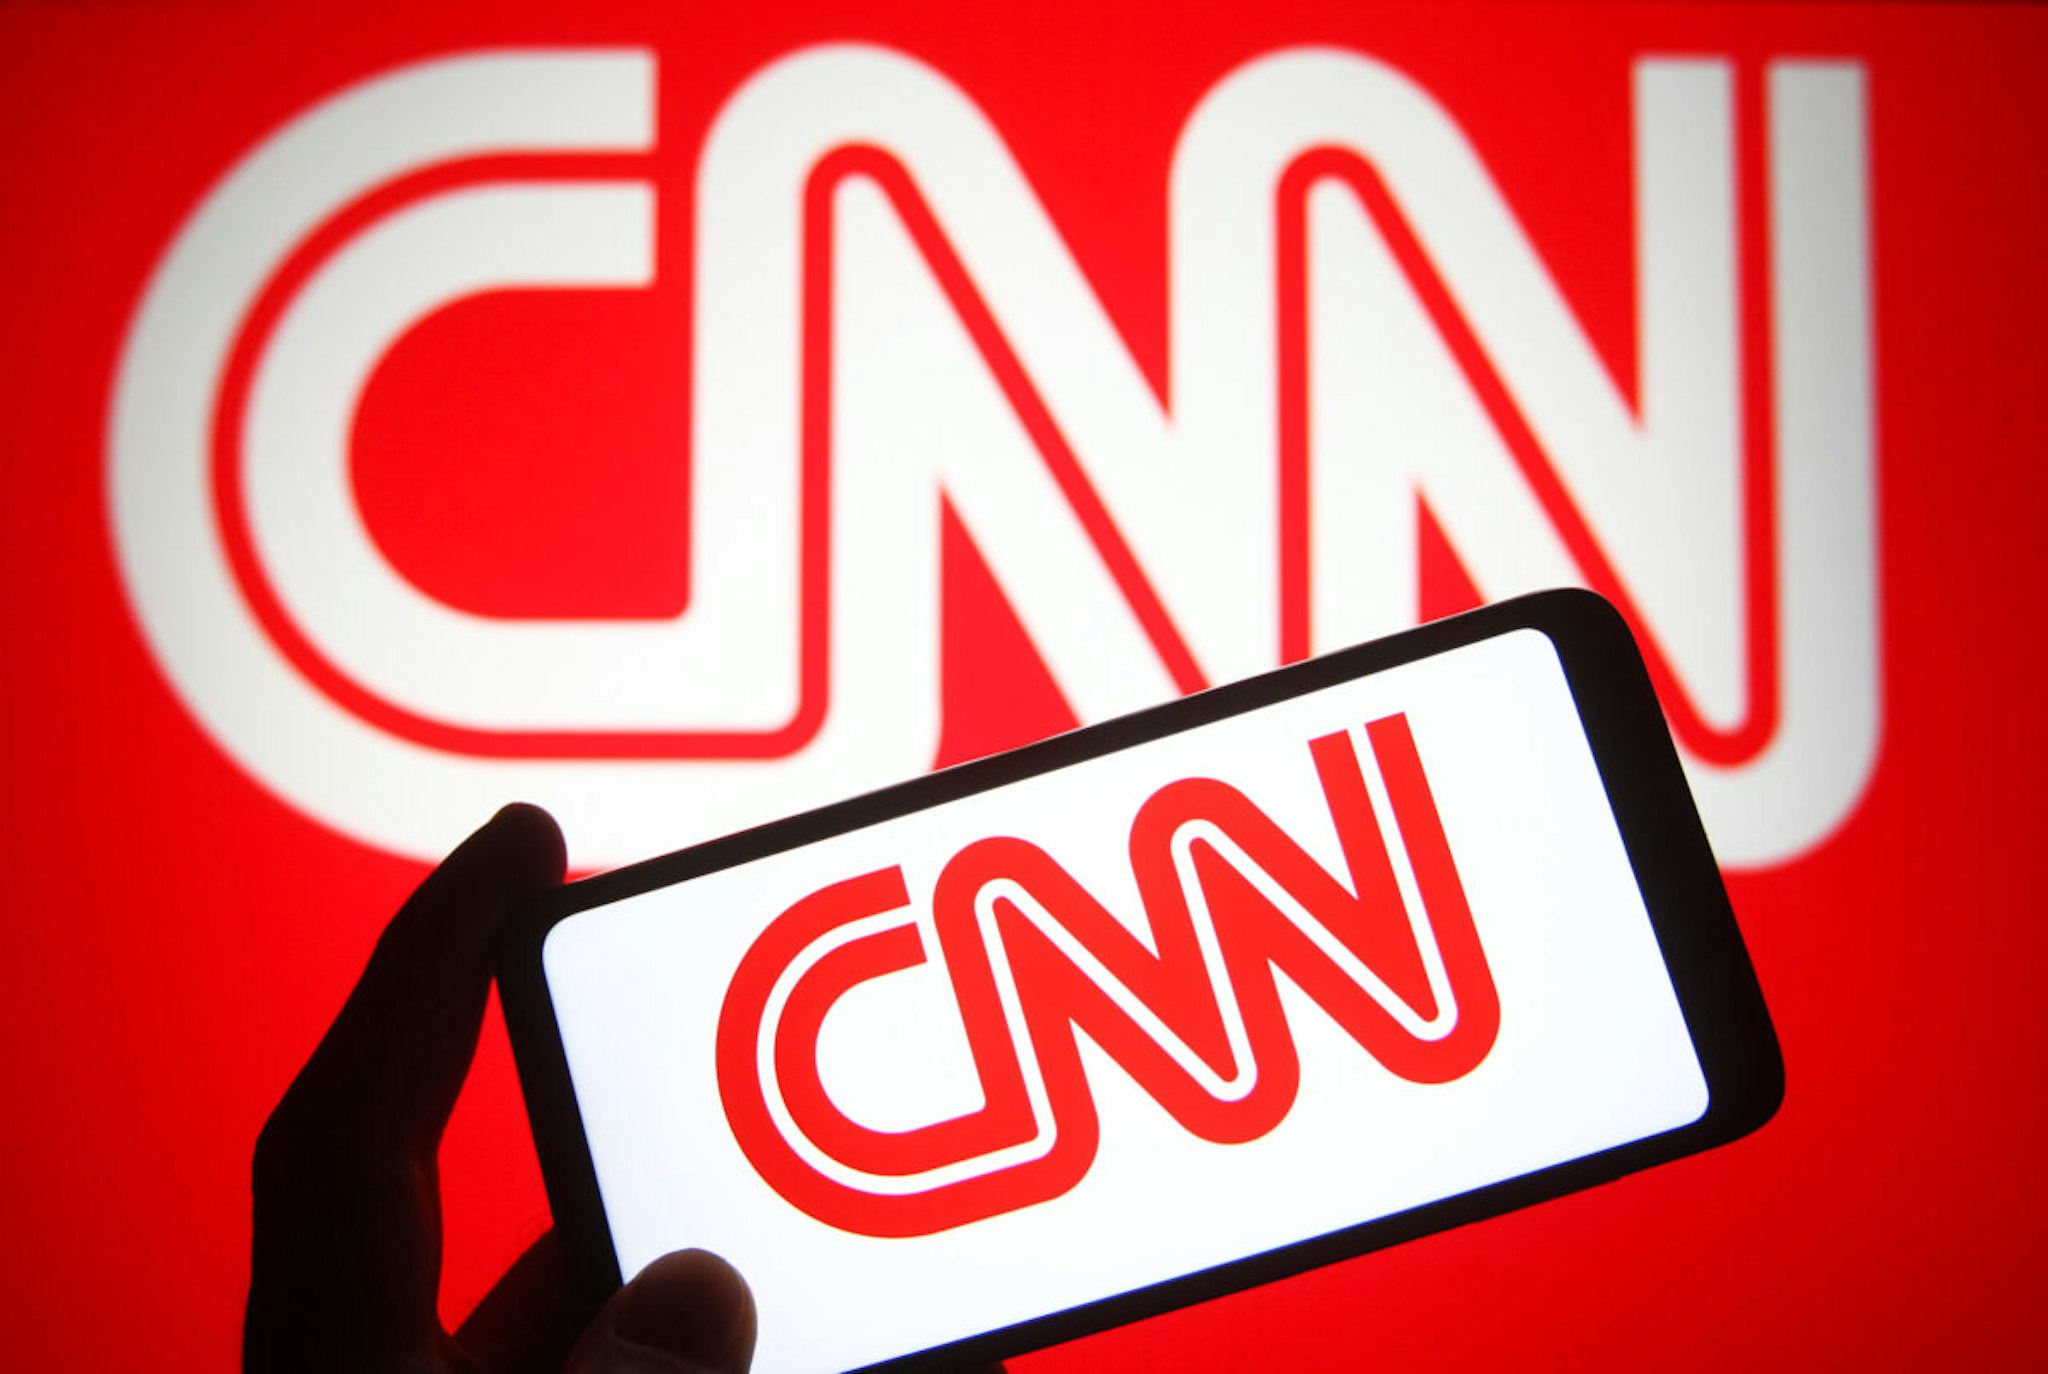 UKRAINE - 2021/10/23: In this photo illustration a CNN (Cable News Network) logo is seen on a smartphone and a pc screen.